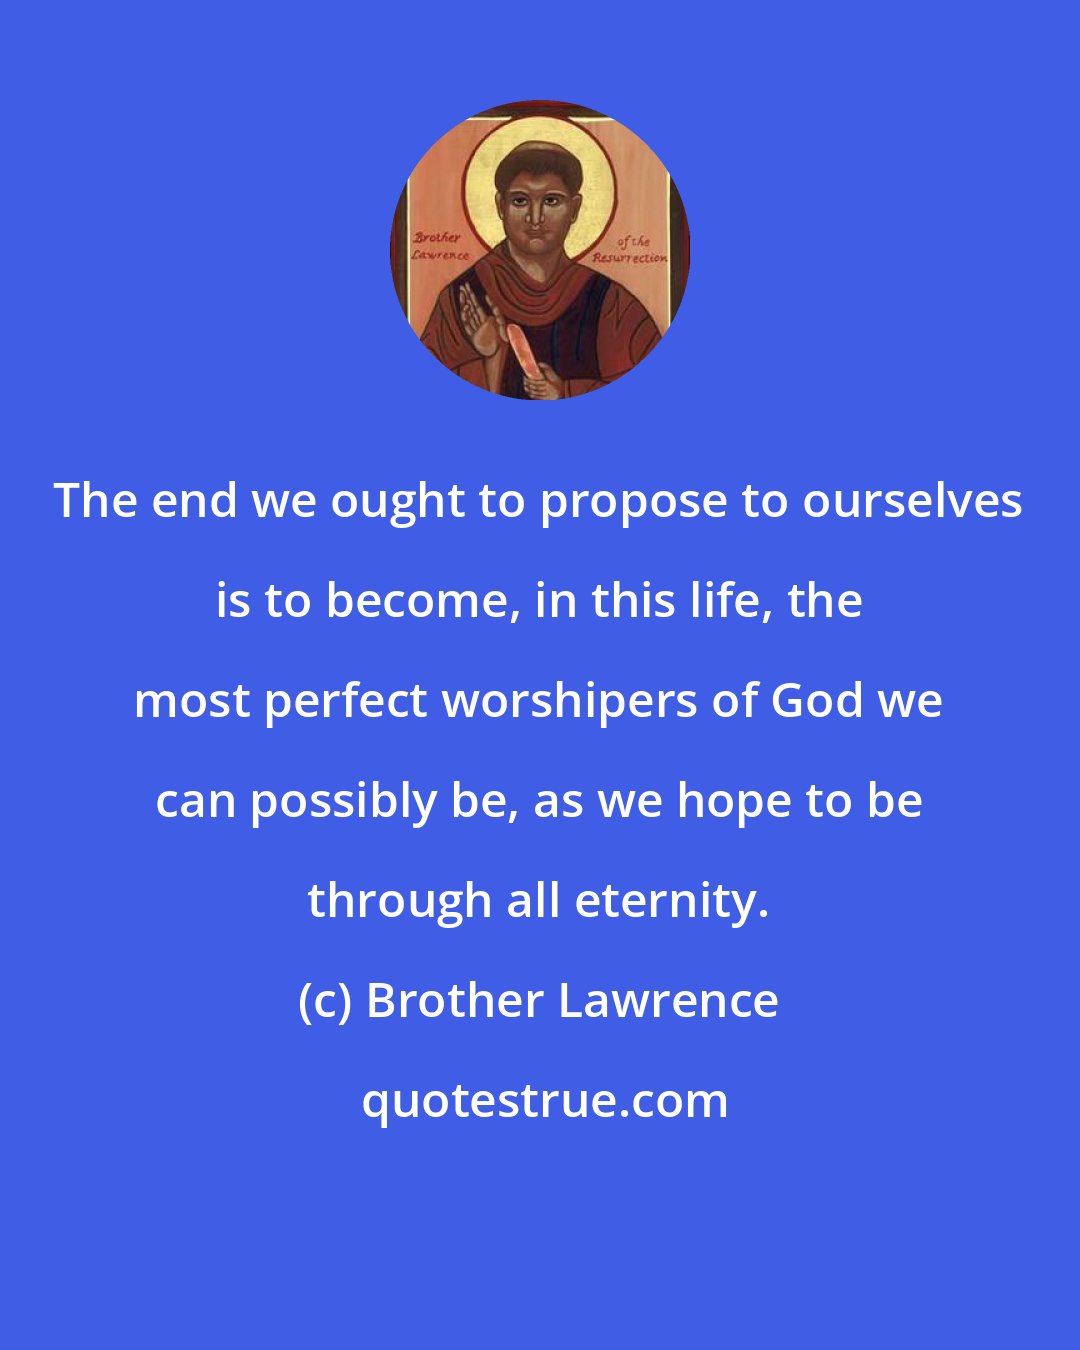 Brother Lawrence: The end we ought to propose to ourselves is to become, in this life, the most perfect worshipers of God we can possibly be, as we hope to be through all eternity.